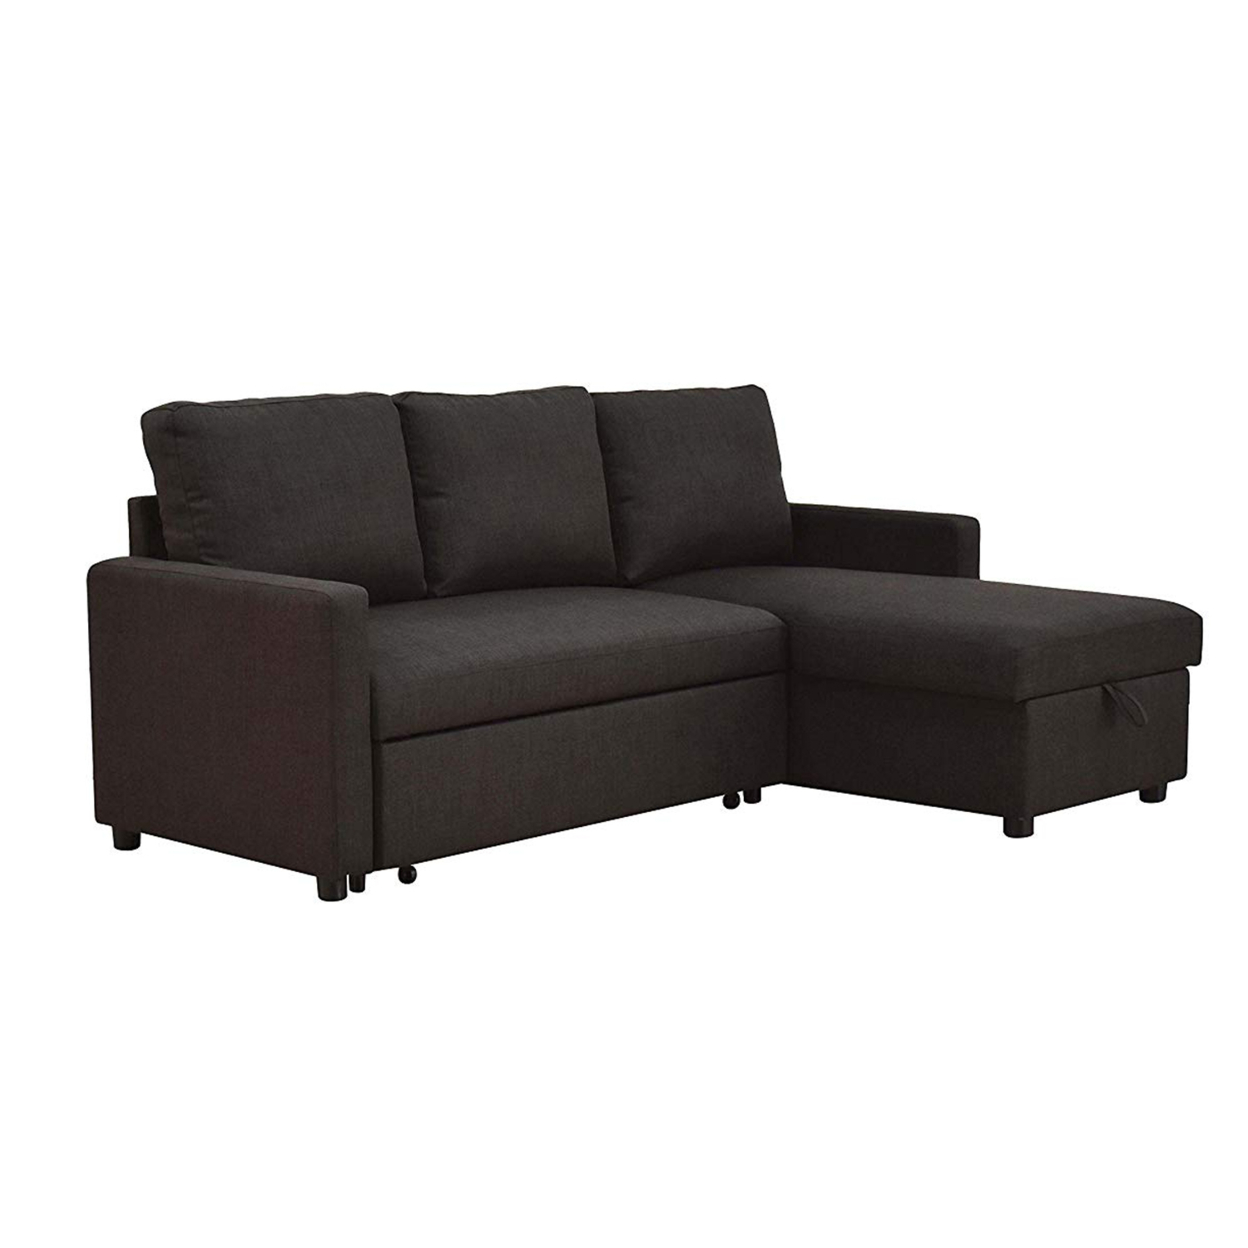 Fabric Upholstered Sectional Sofa With Pull Out Sleeper And Hidden Storage, Black- Saltoro Sherpi